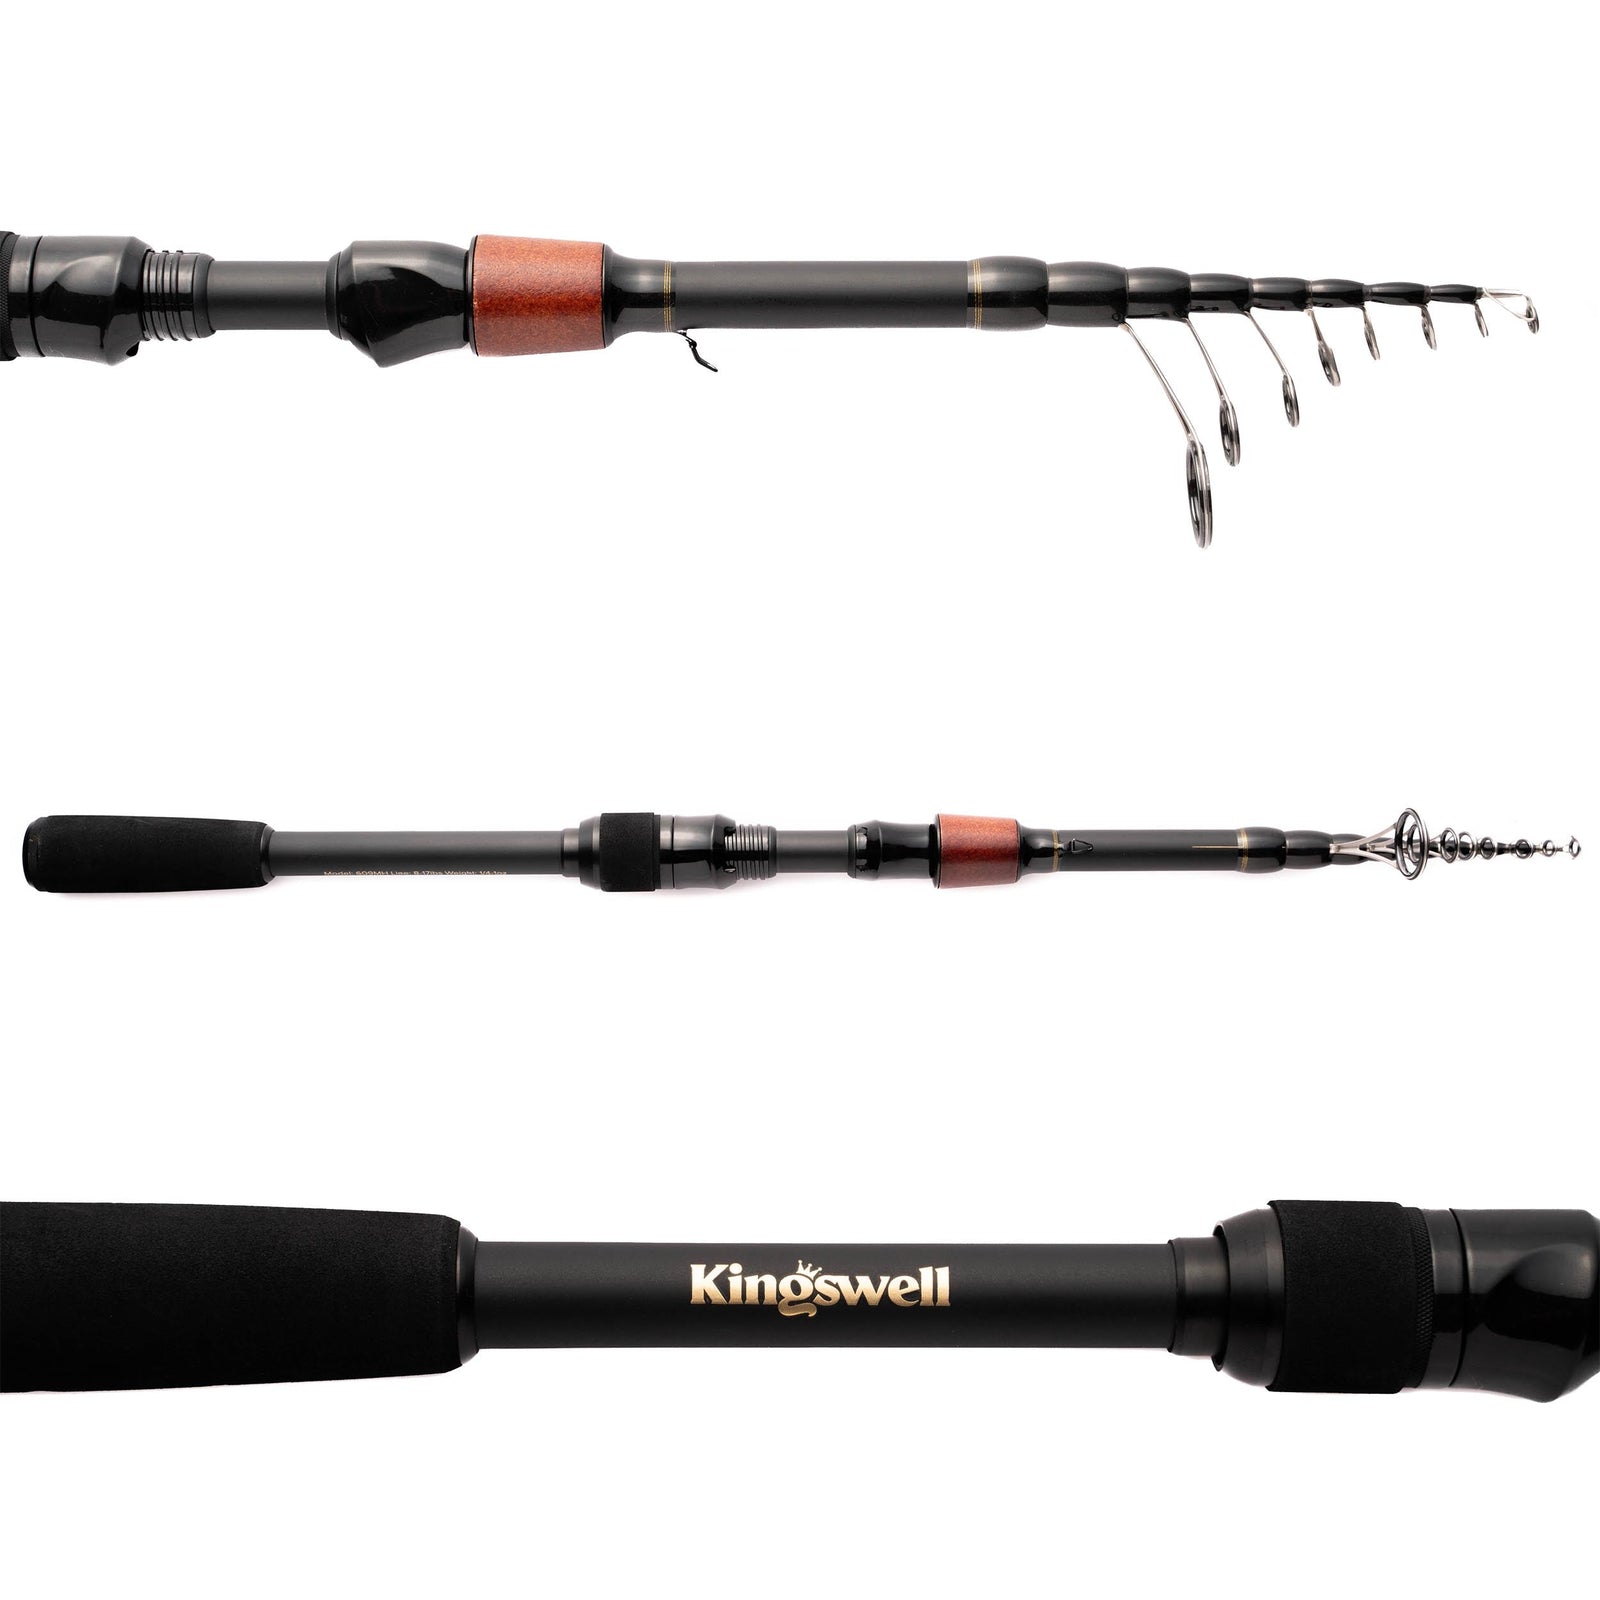 Kingswell 7'10" Telescopic Fishing Rod Only